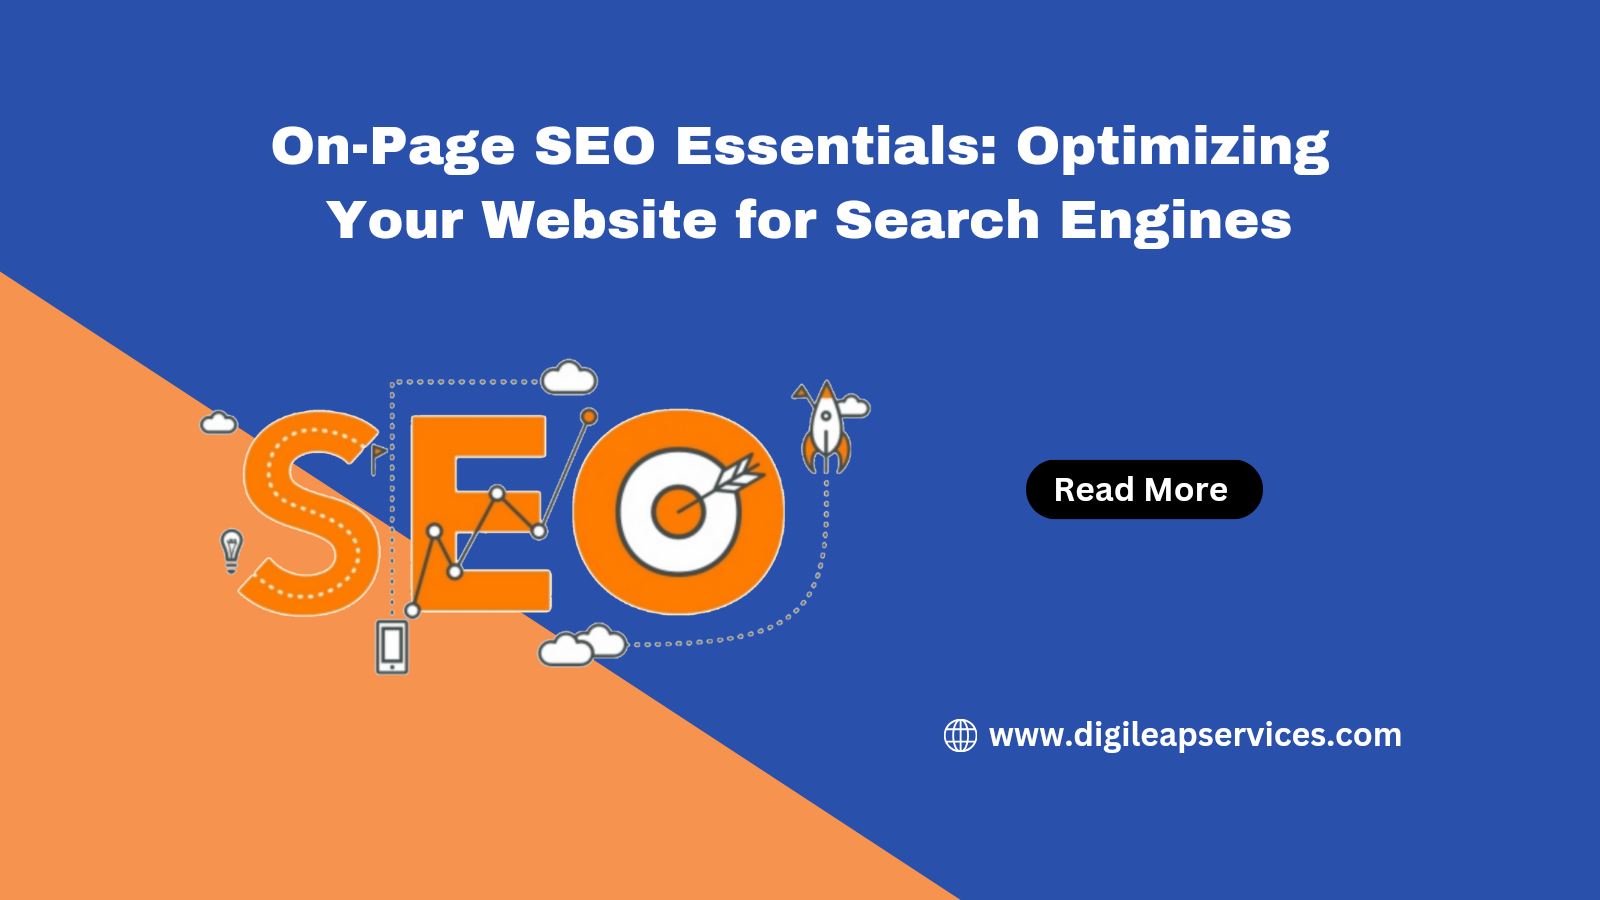 On-Page SEO Essentials: Optimizing Your Website for Search Engines